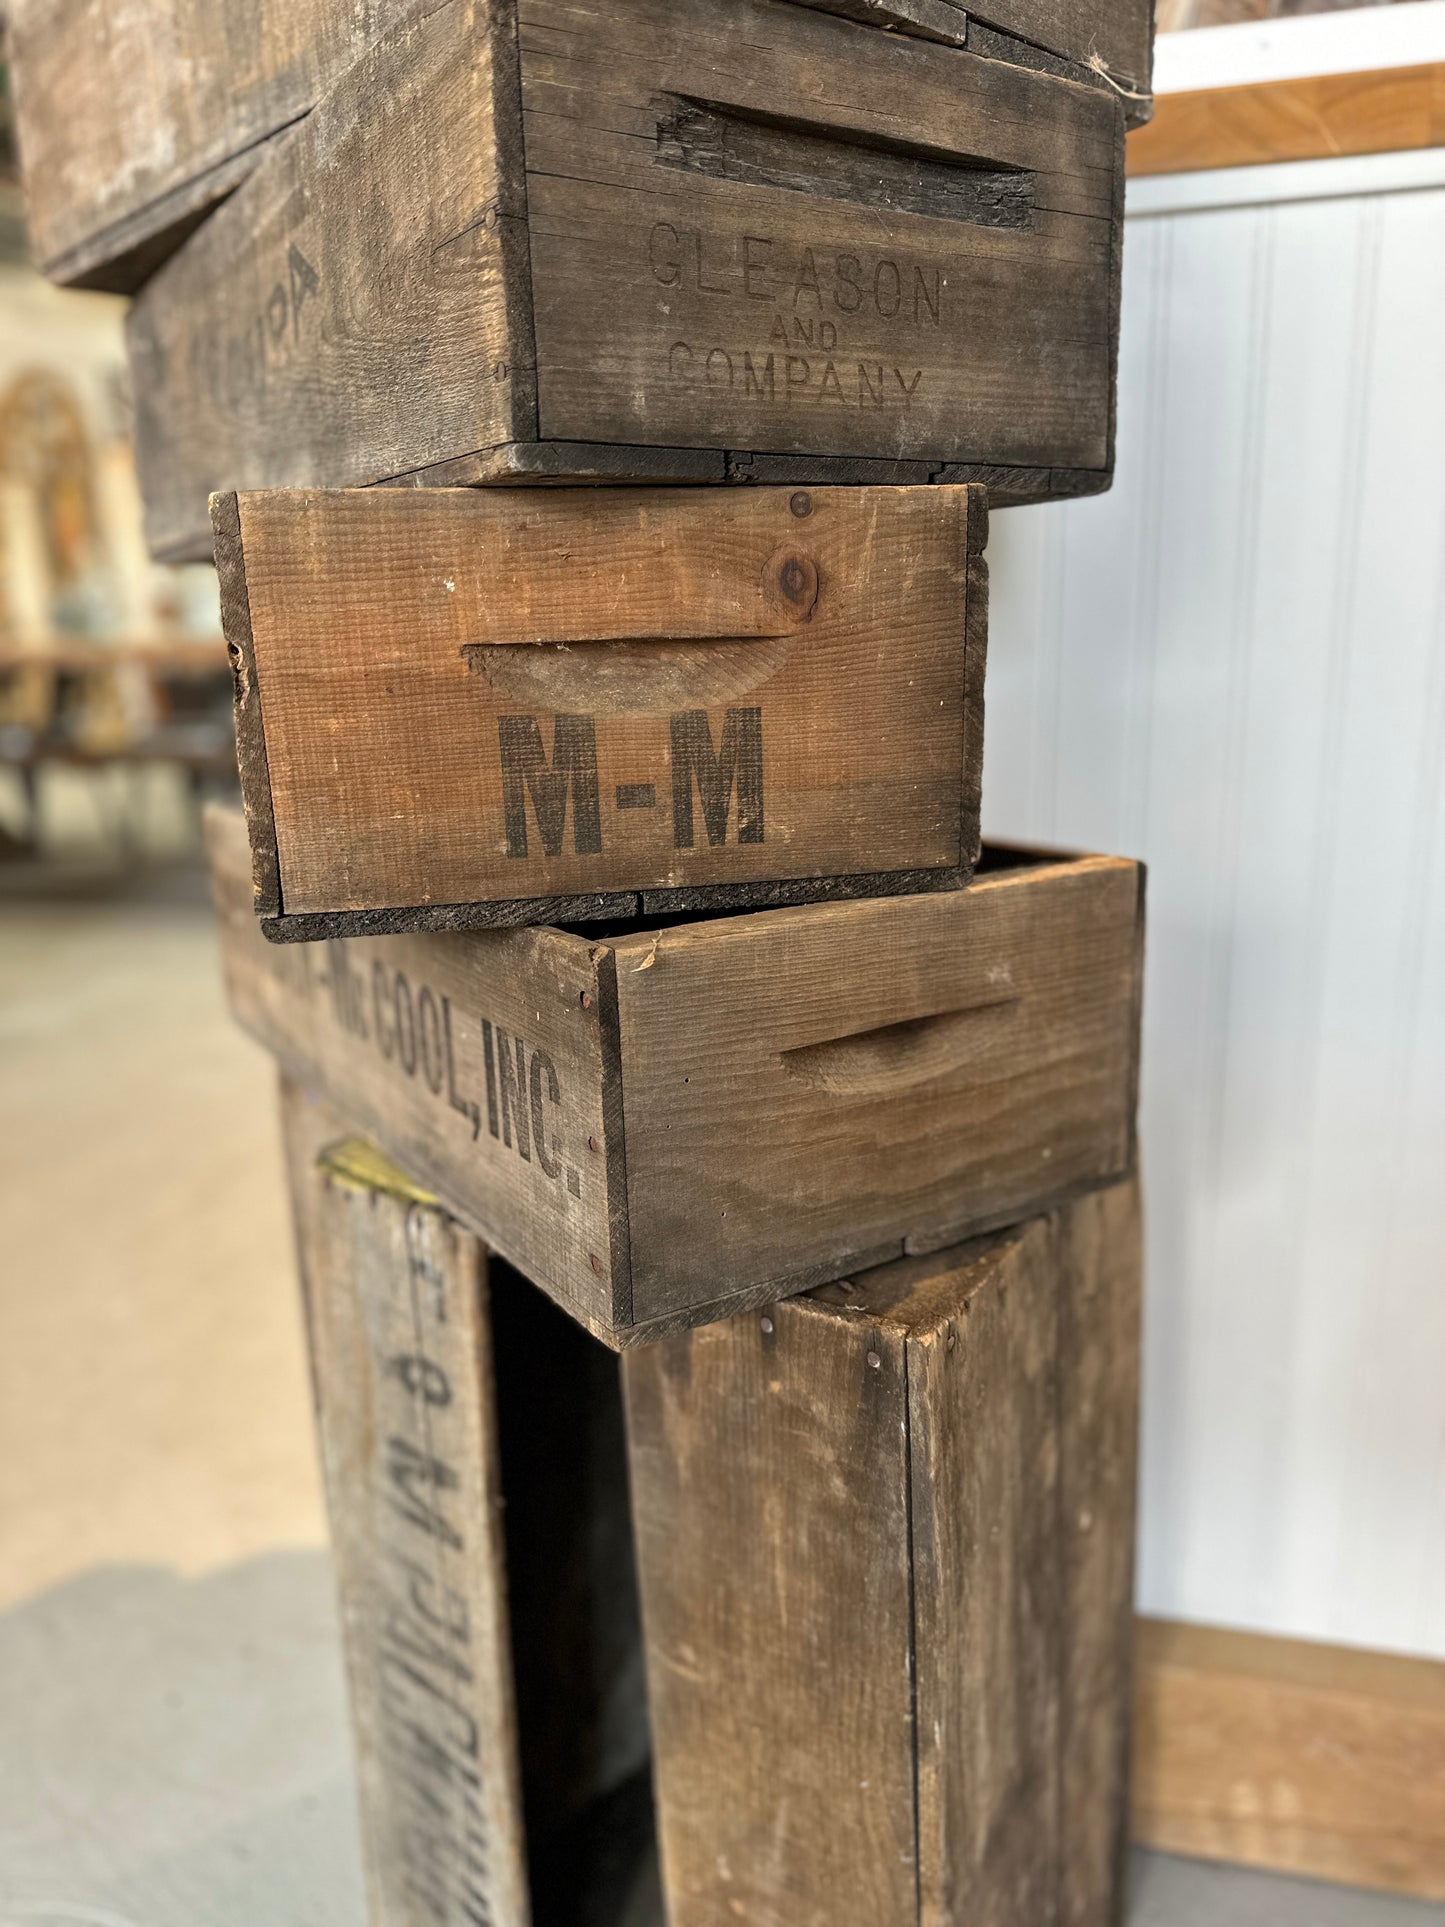 Vintage Wood Cherry Lugs (Crates) from Northwest Lower Michigan